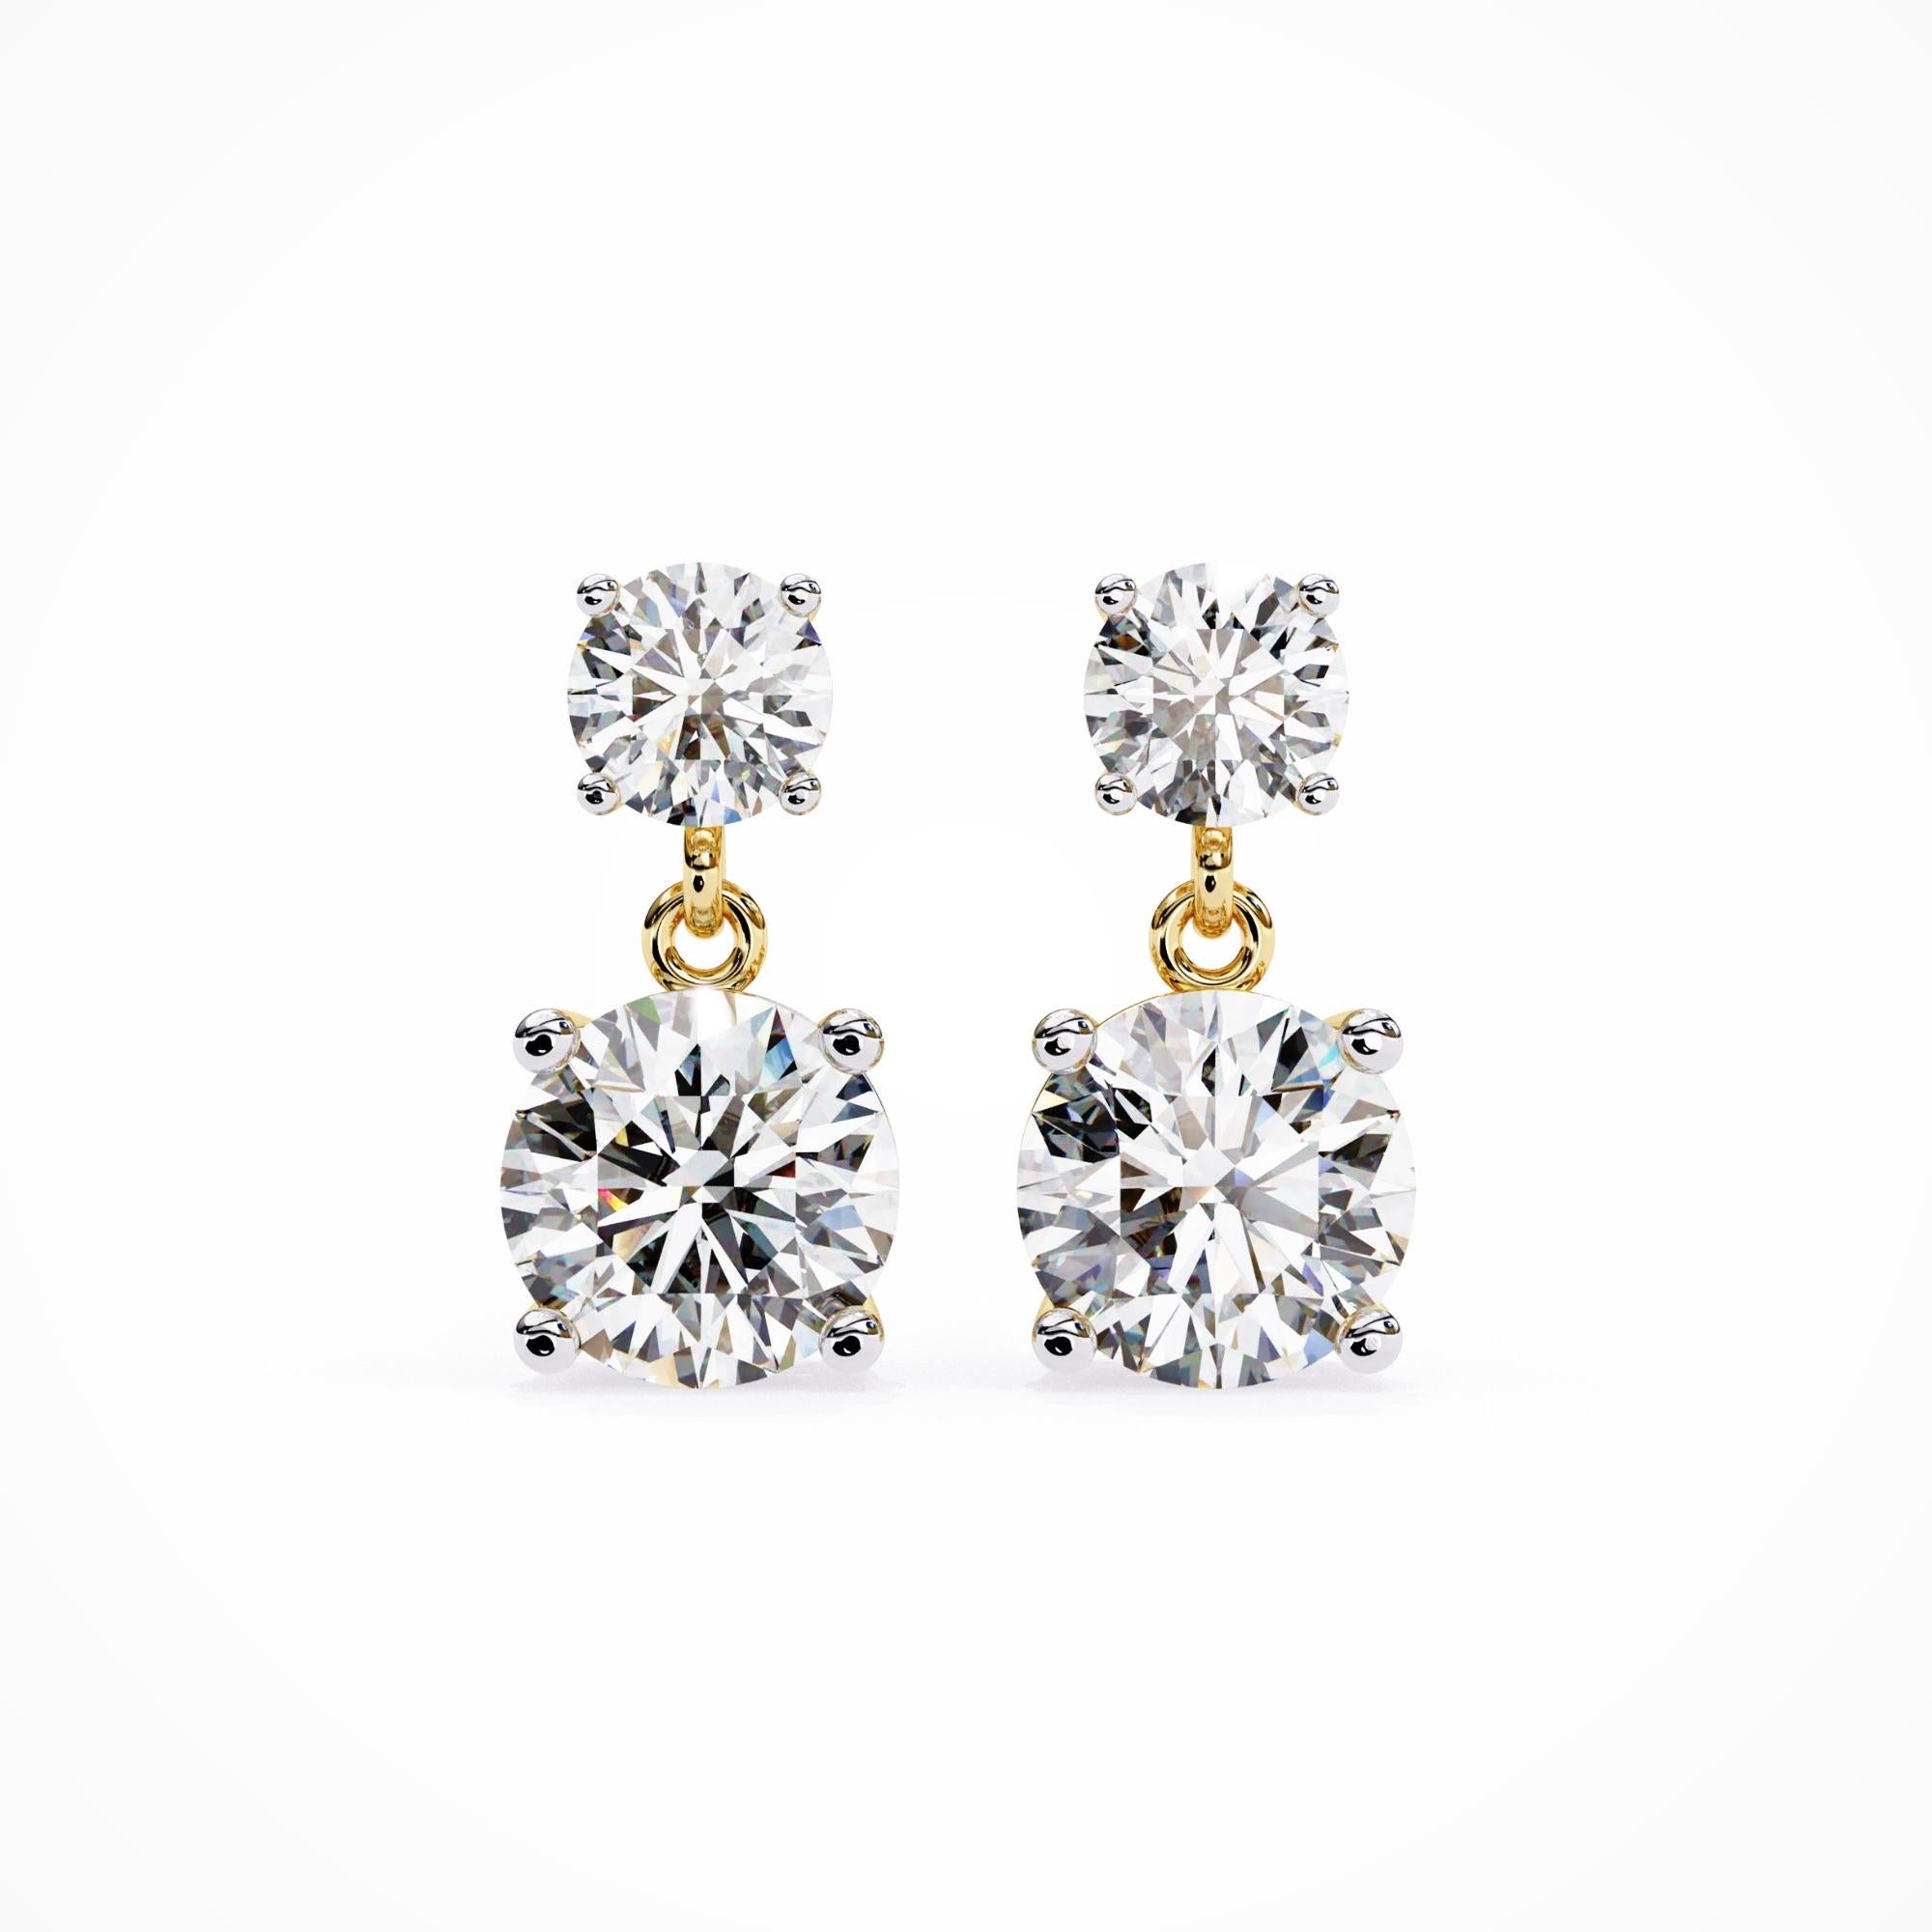 Round Drop Earrings 14K Gold Natural Diamond 1 Carat Total Weight In New Condition For Sale In New York, NY